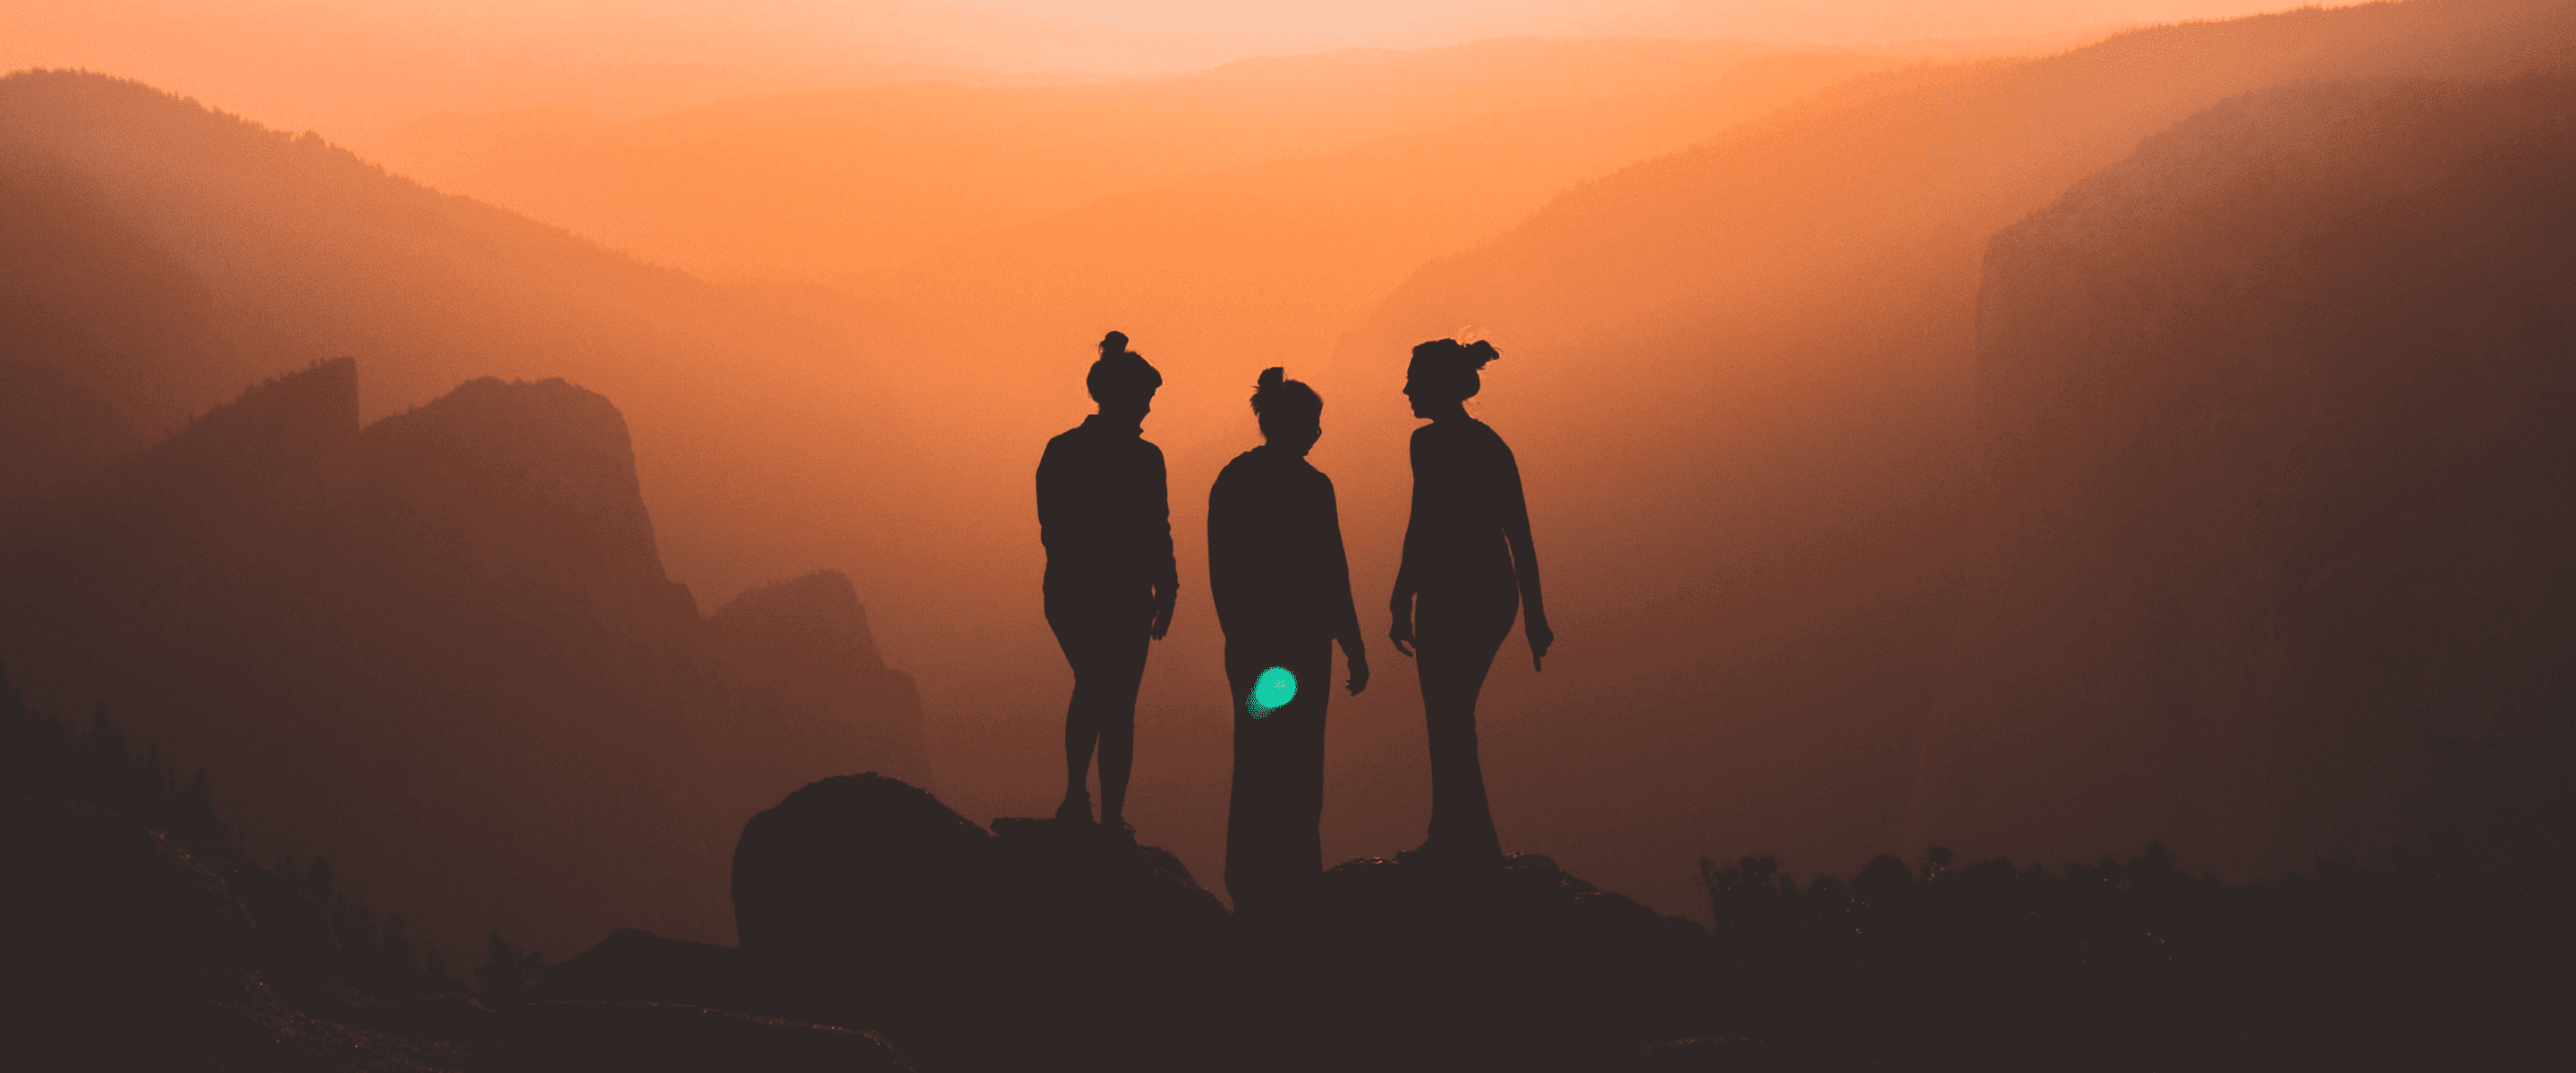 An image of three women standing on a high point and looking out at mountains and formations with a hazy and burnt orange sky.